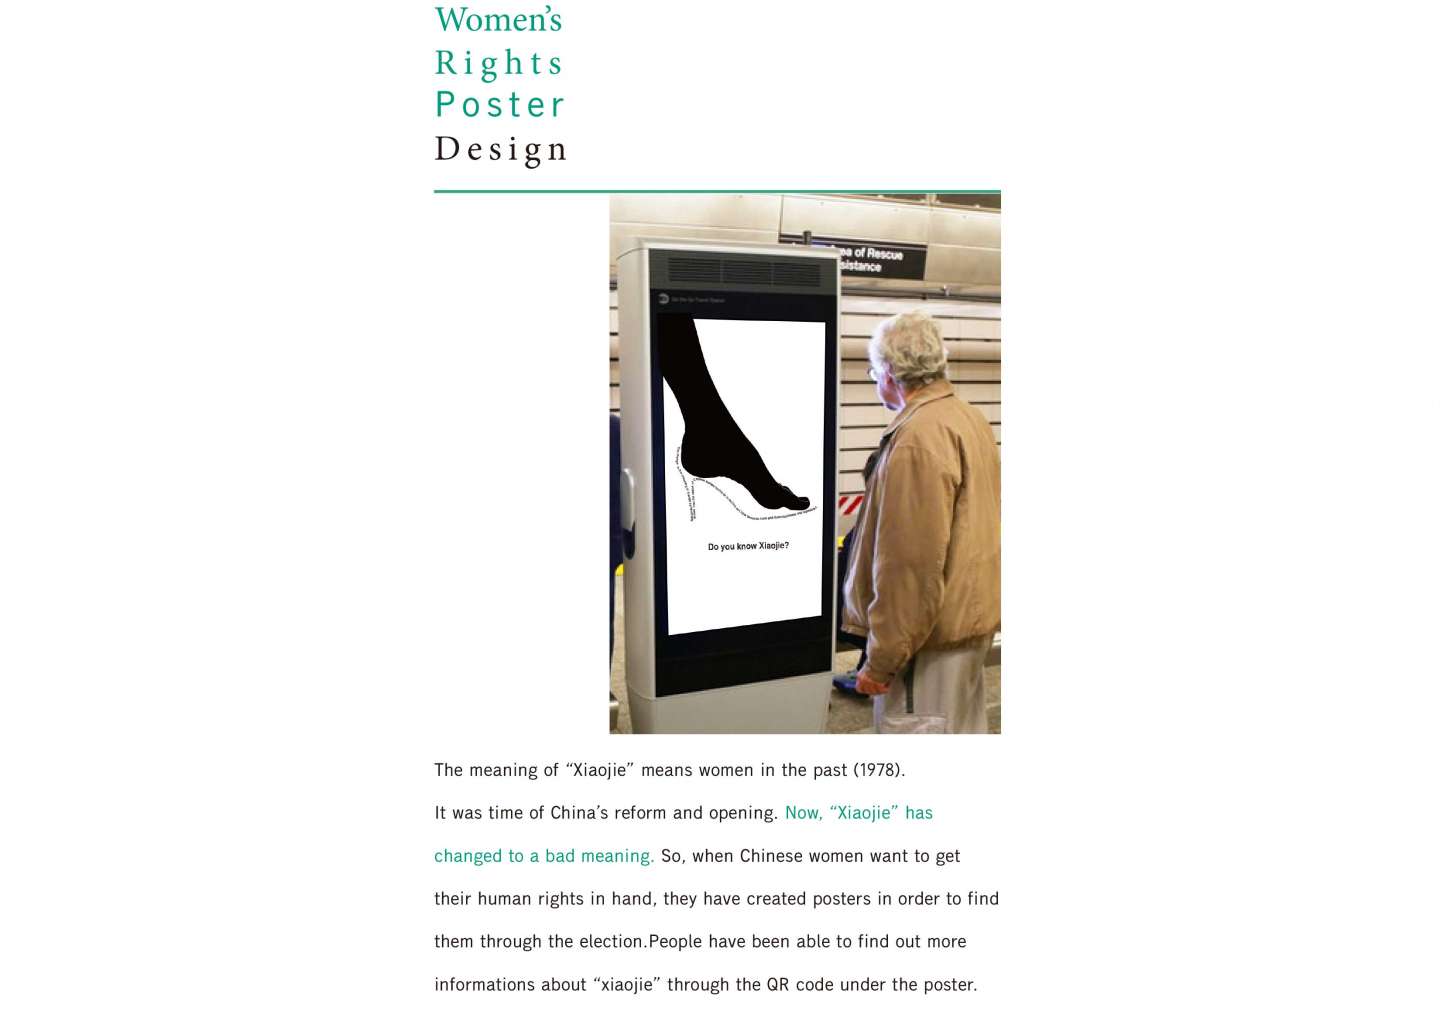 Women's human rights poster design